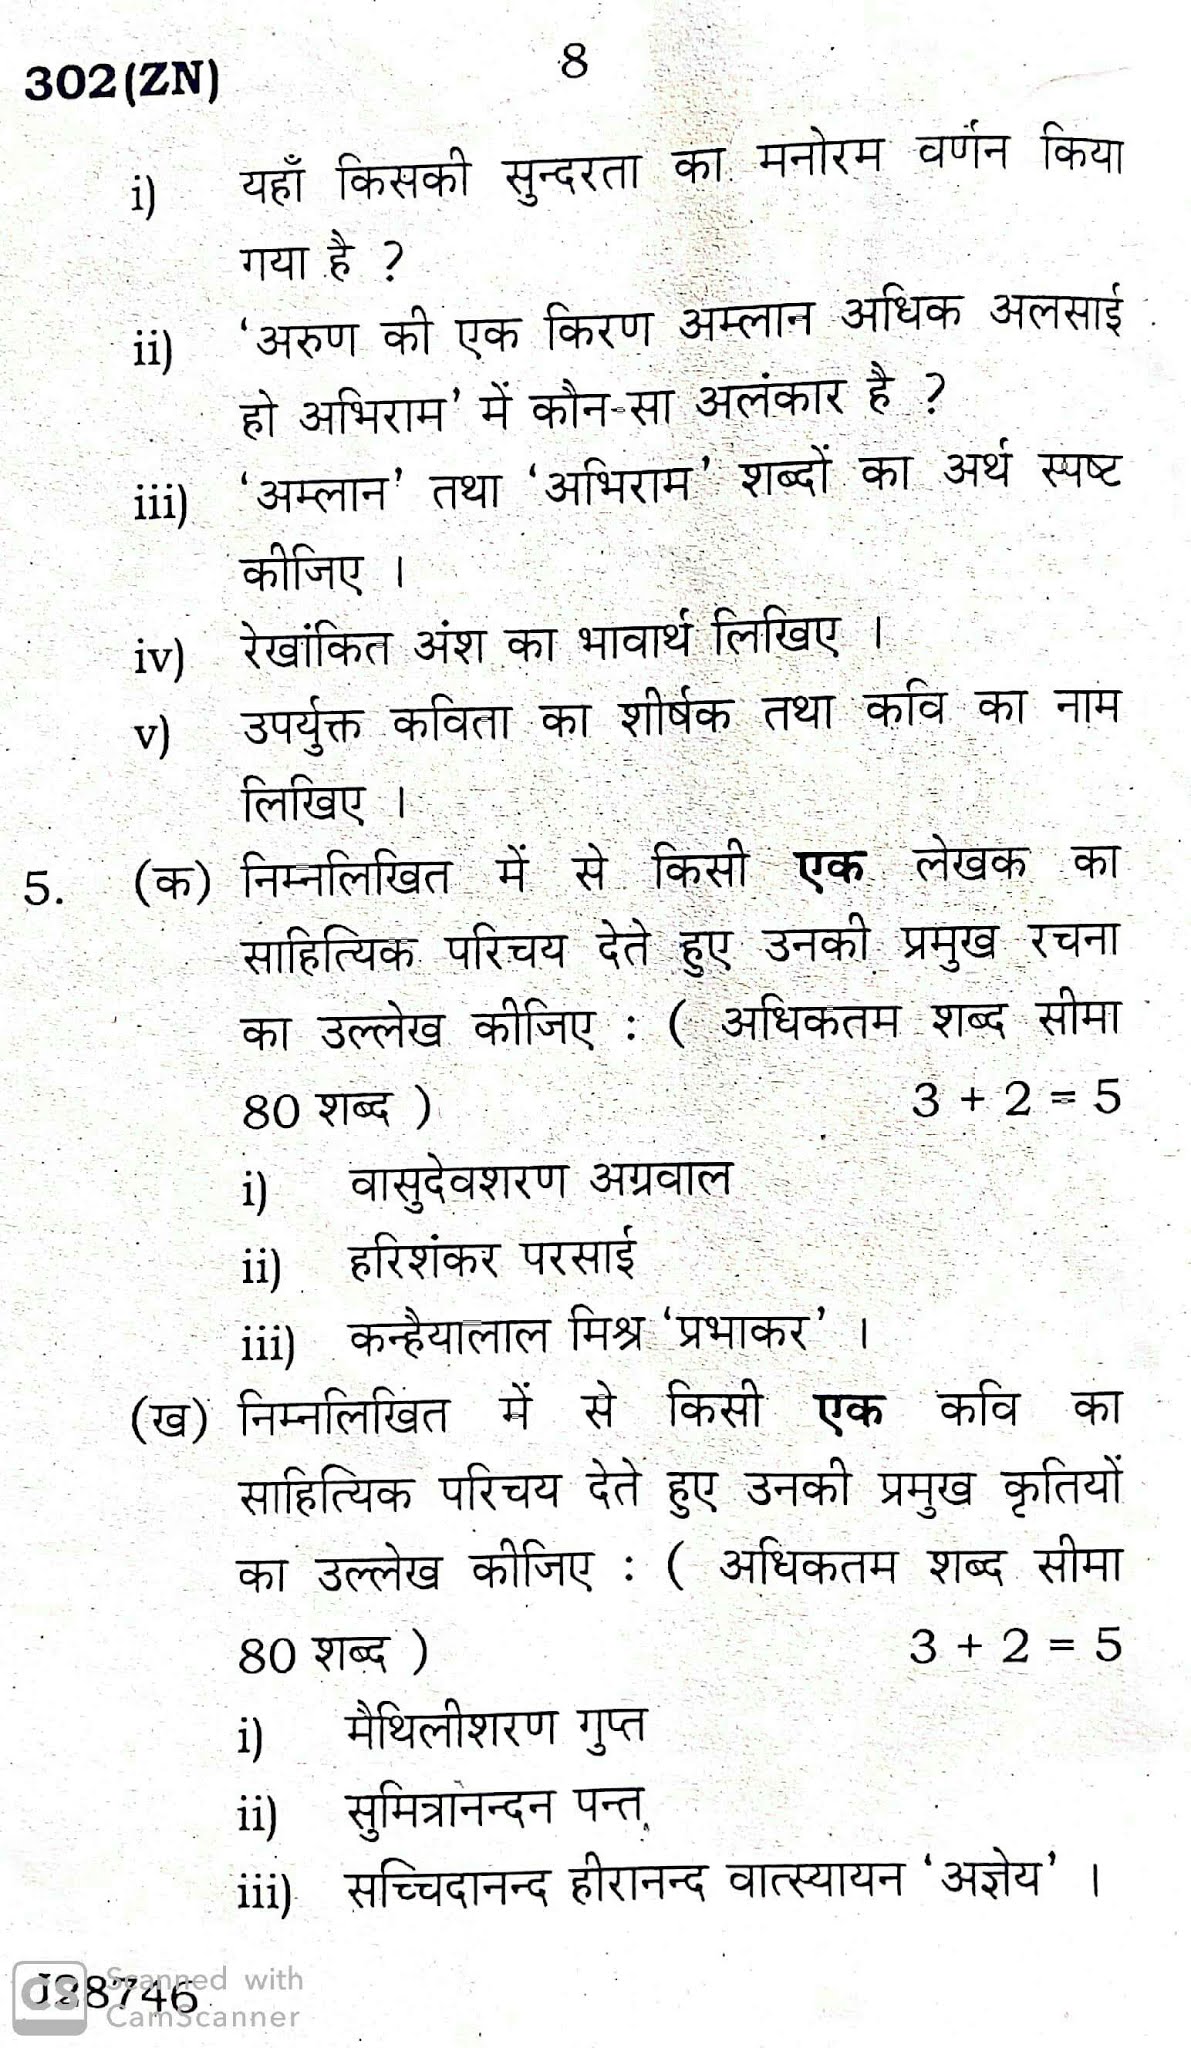 Hindi, UP Board Question Paper for 12th (Intermediate) 2020 examination